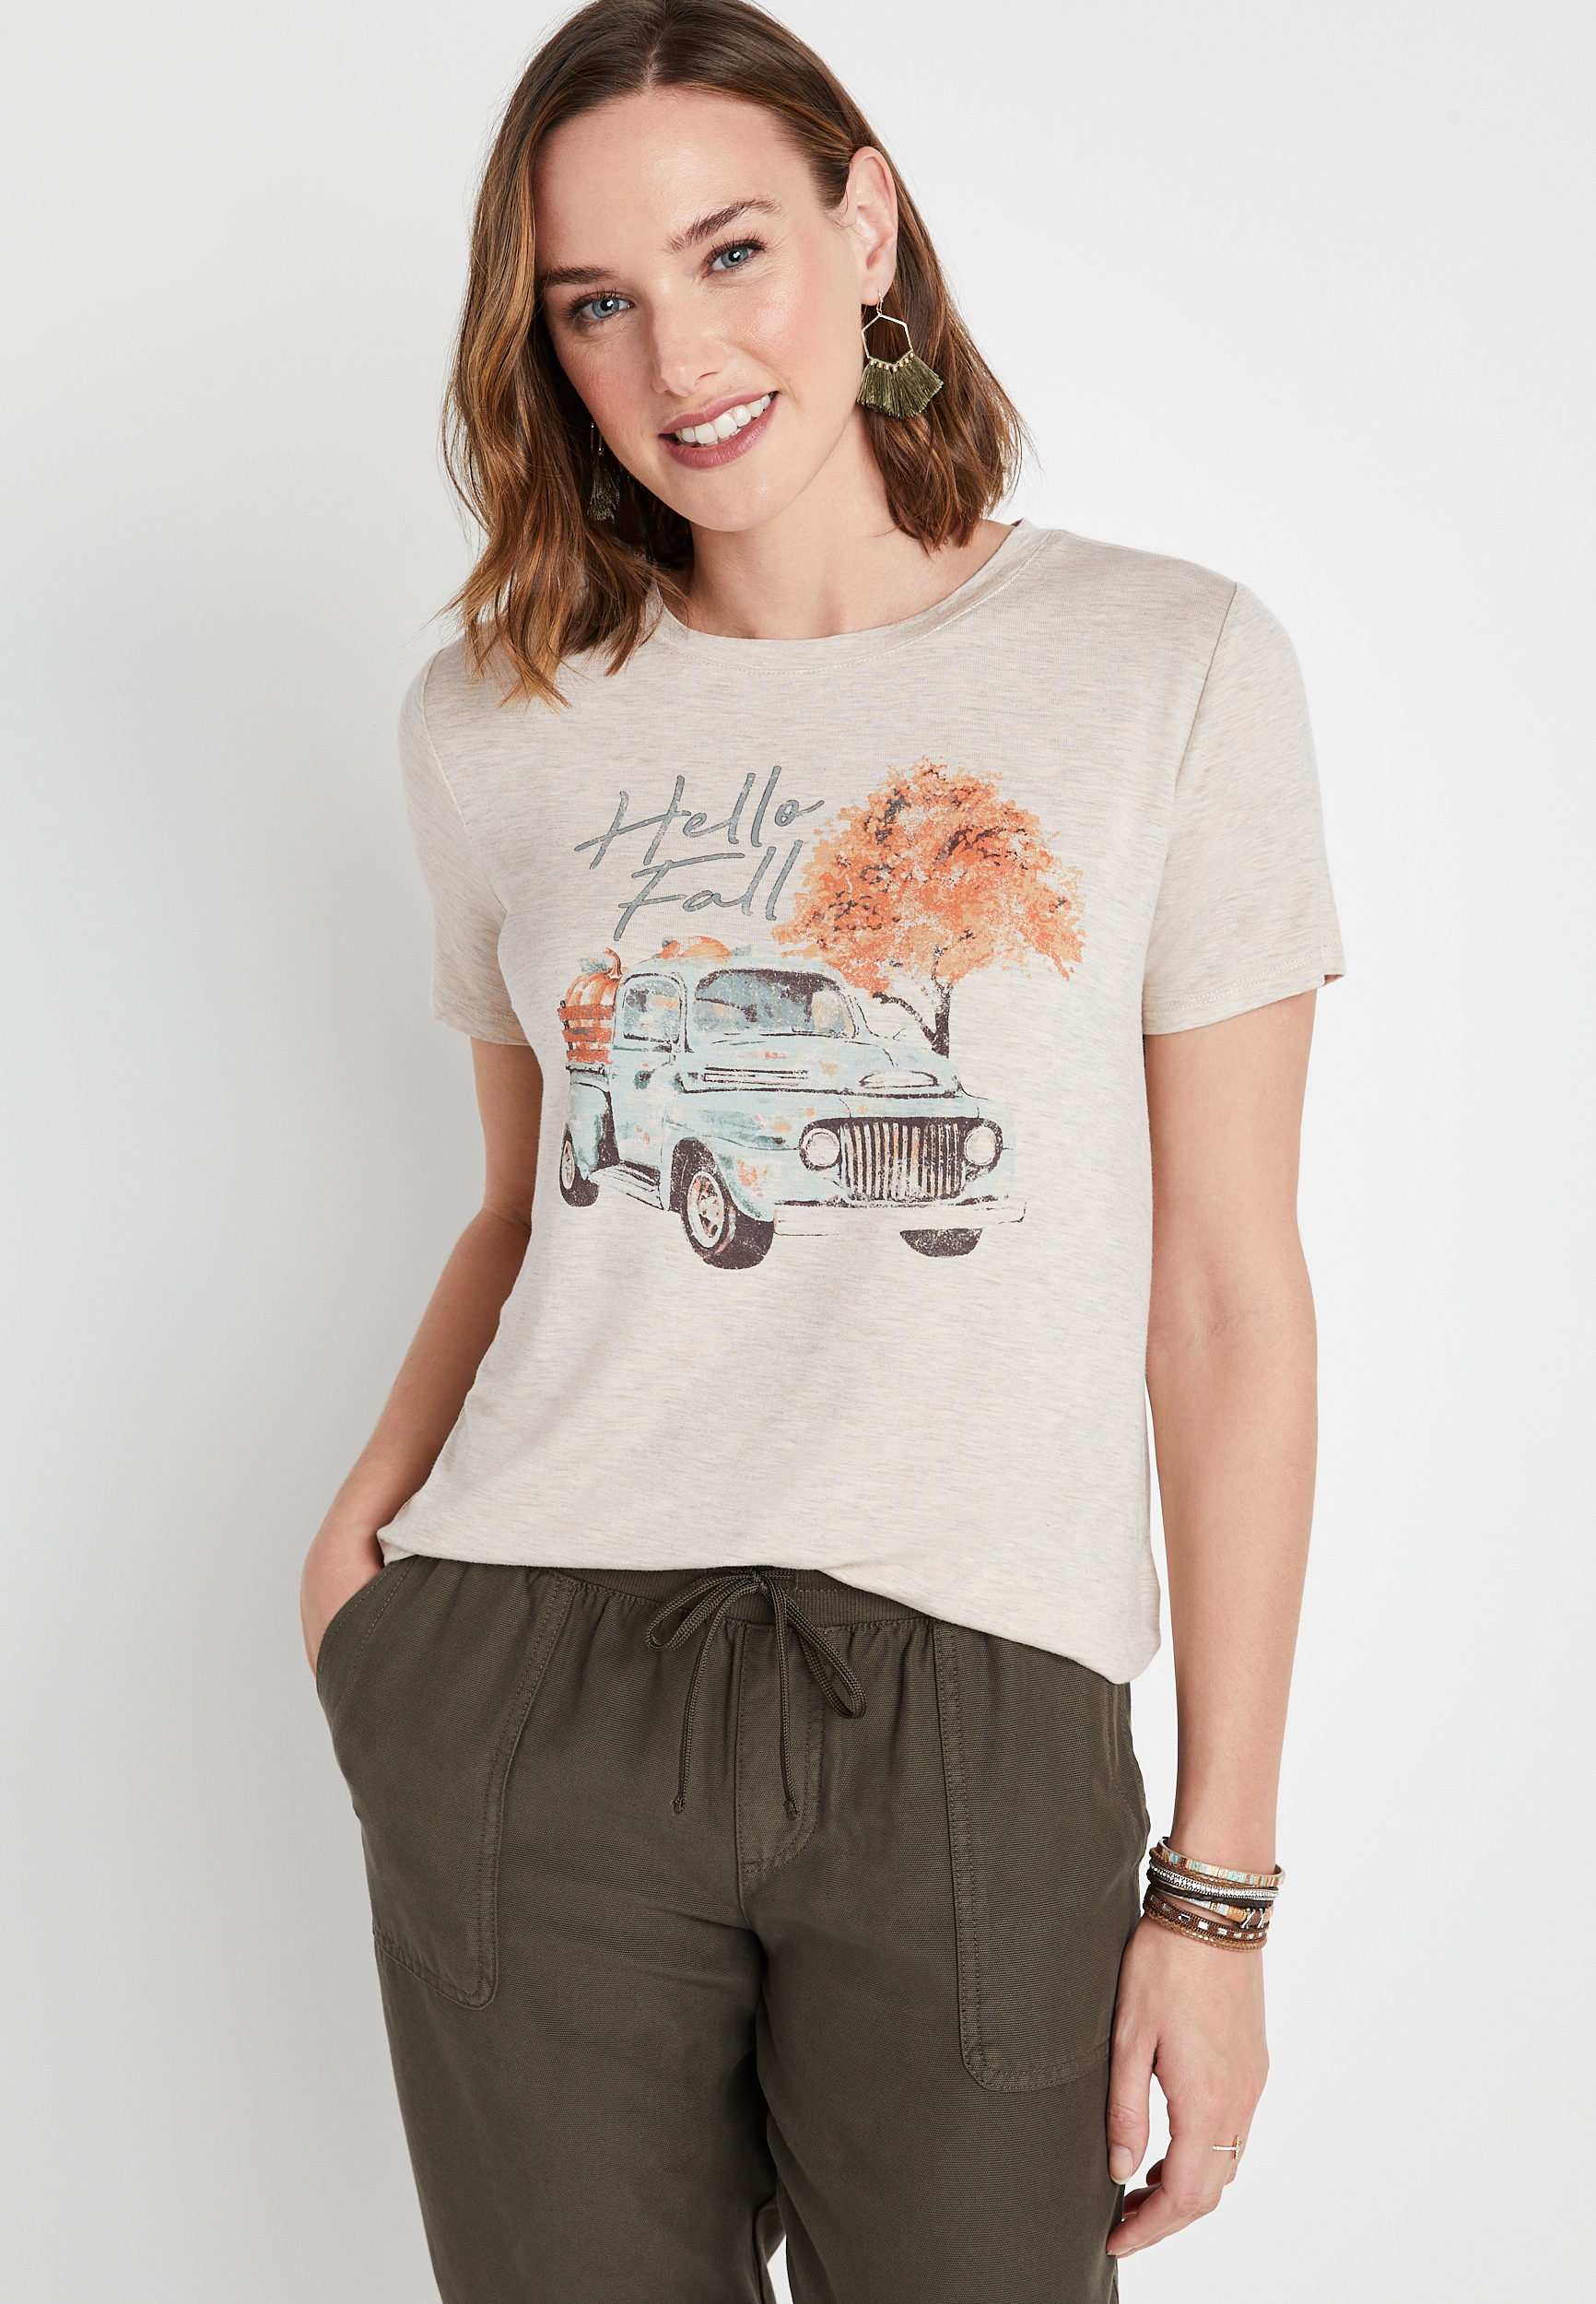 Hello Fall Truck Graphic Tee maurices